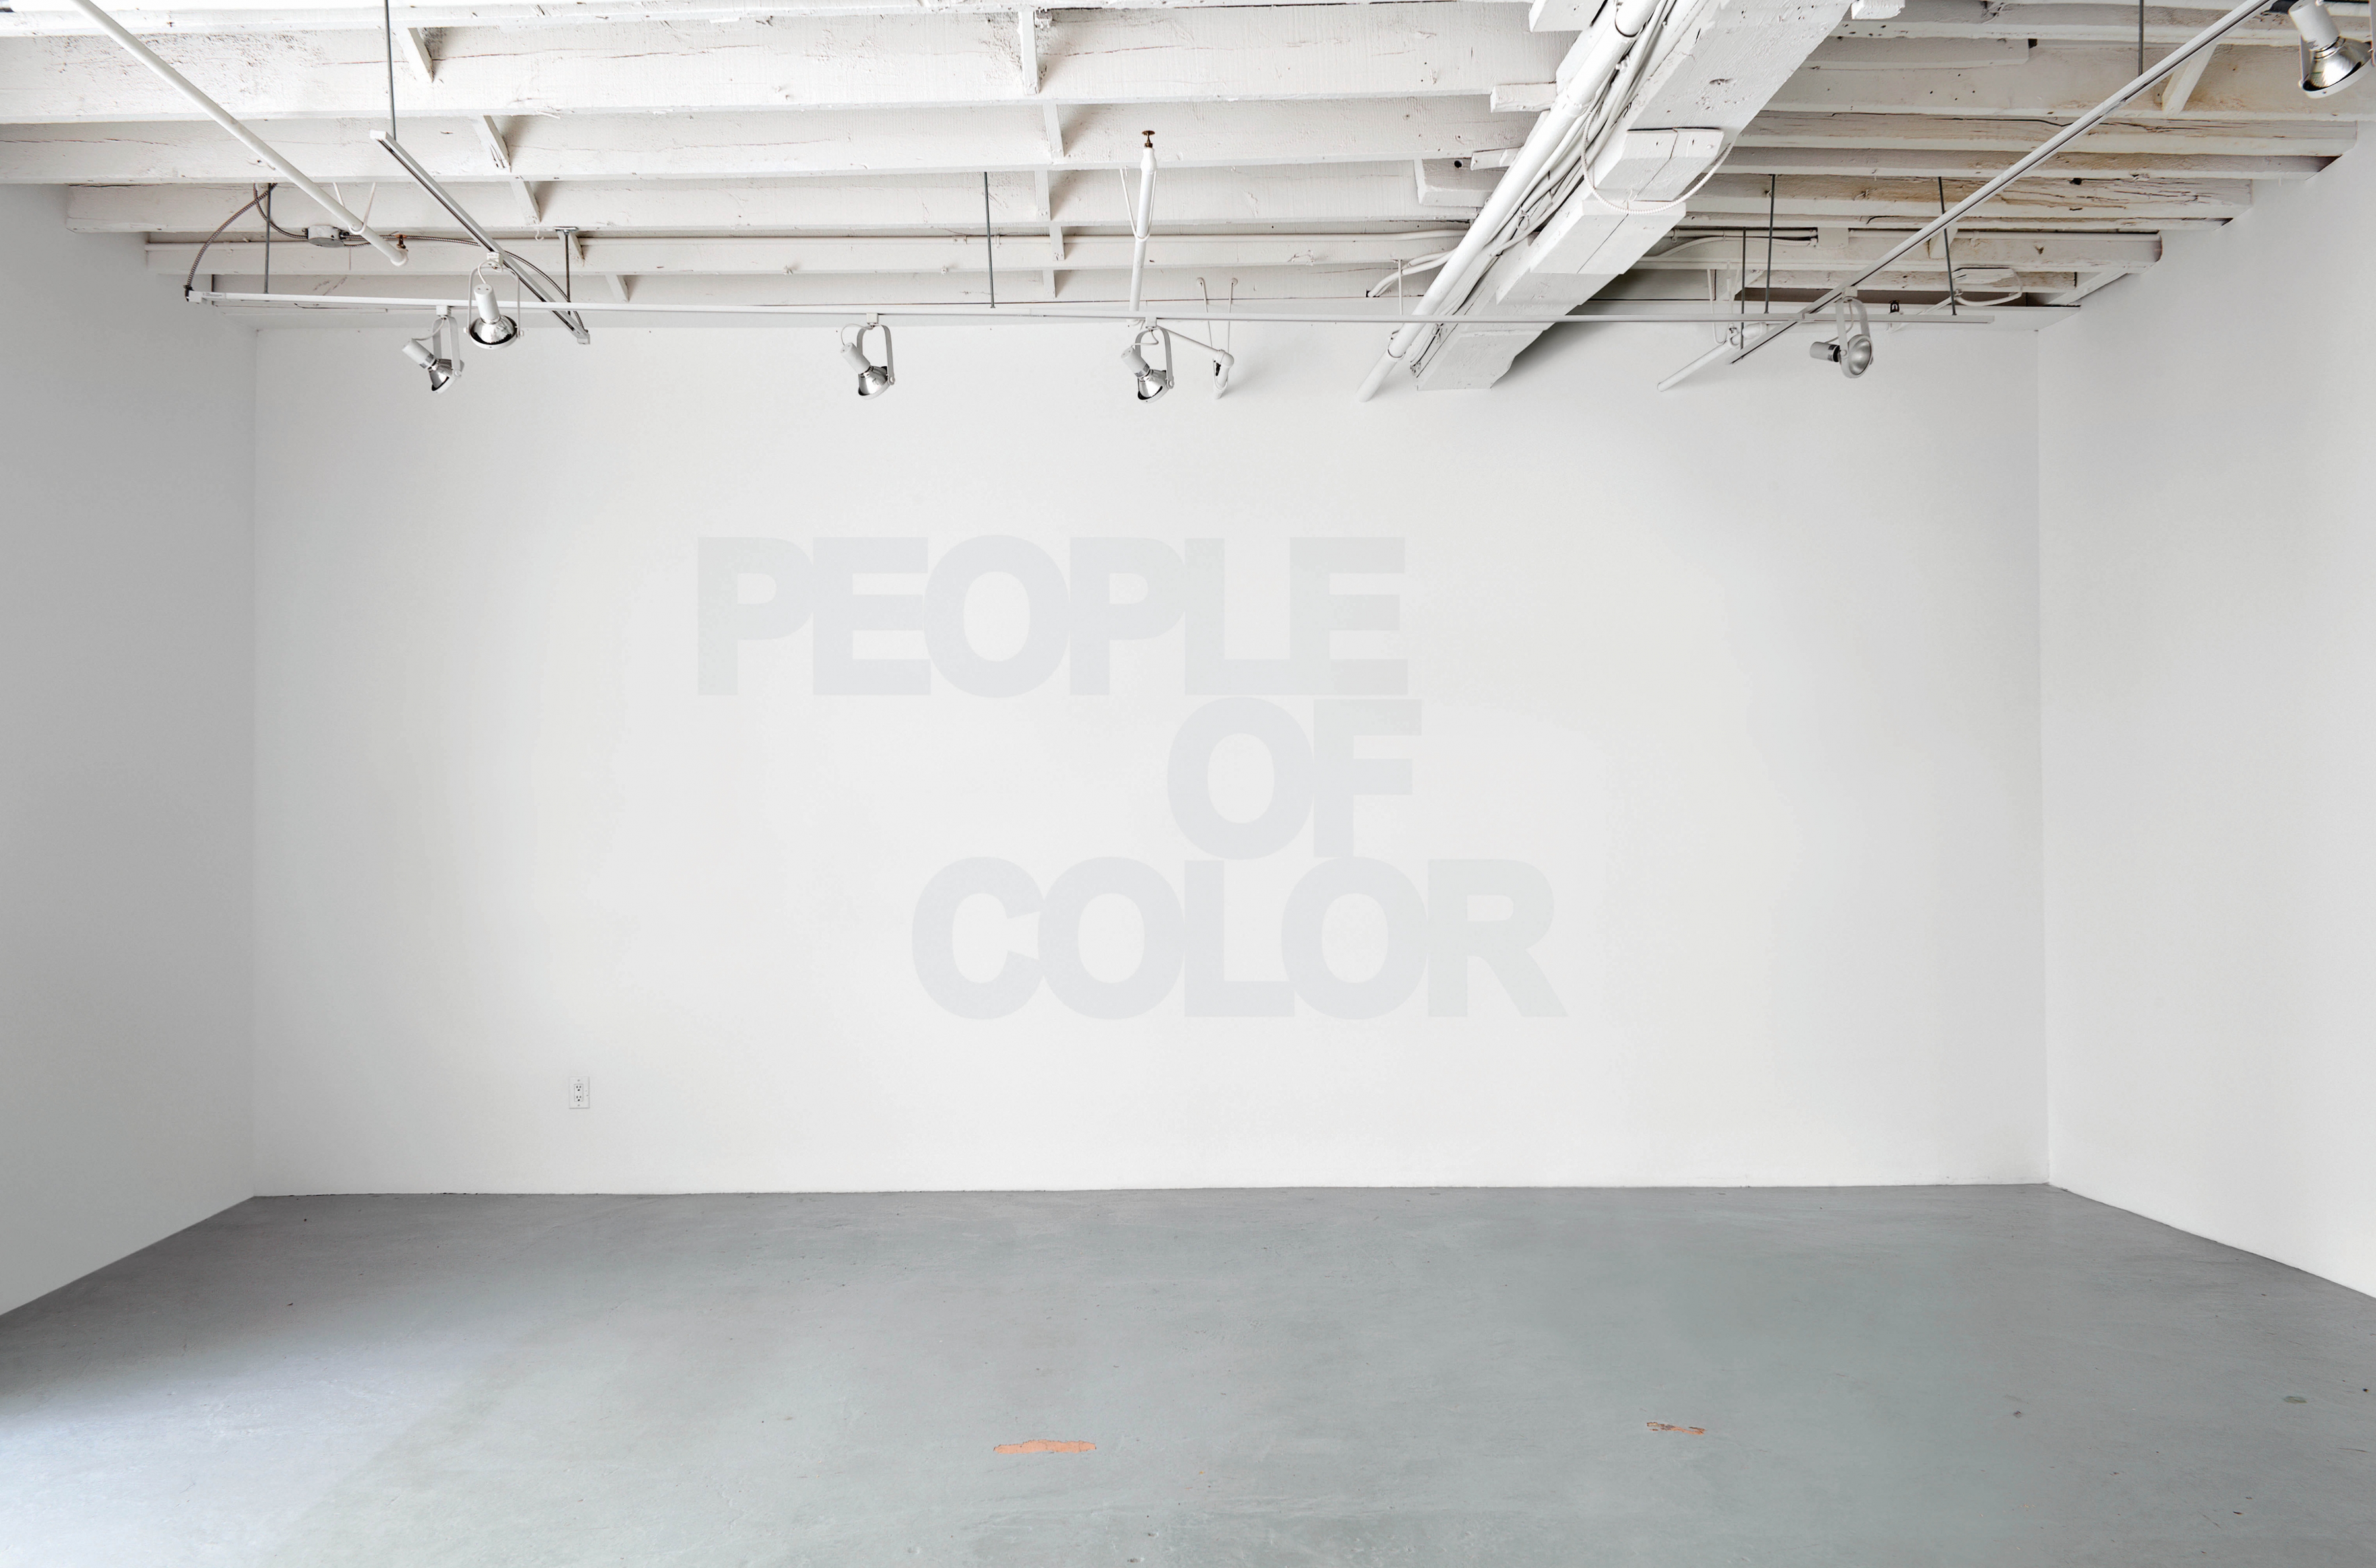 Divya Mehra,&nbsp;Currently Fashionable, 2012/2017.&nbsp;
Installation view&nbsp;at Georgia Scherman Projects, Toronto, Canada for the solo exhibition
You have to tell Them, i&rsquo;m not a Racist.
Photo by Paul Jerinkitsch.